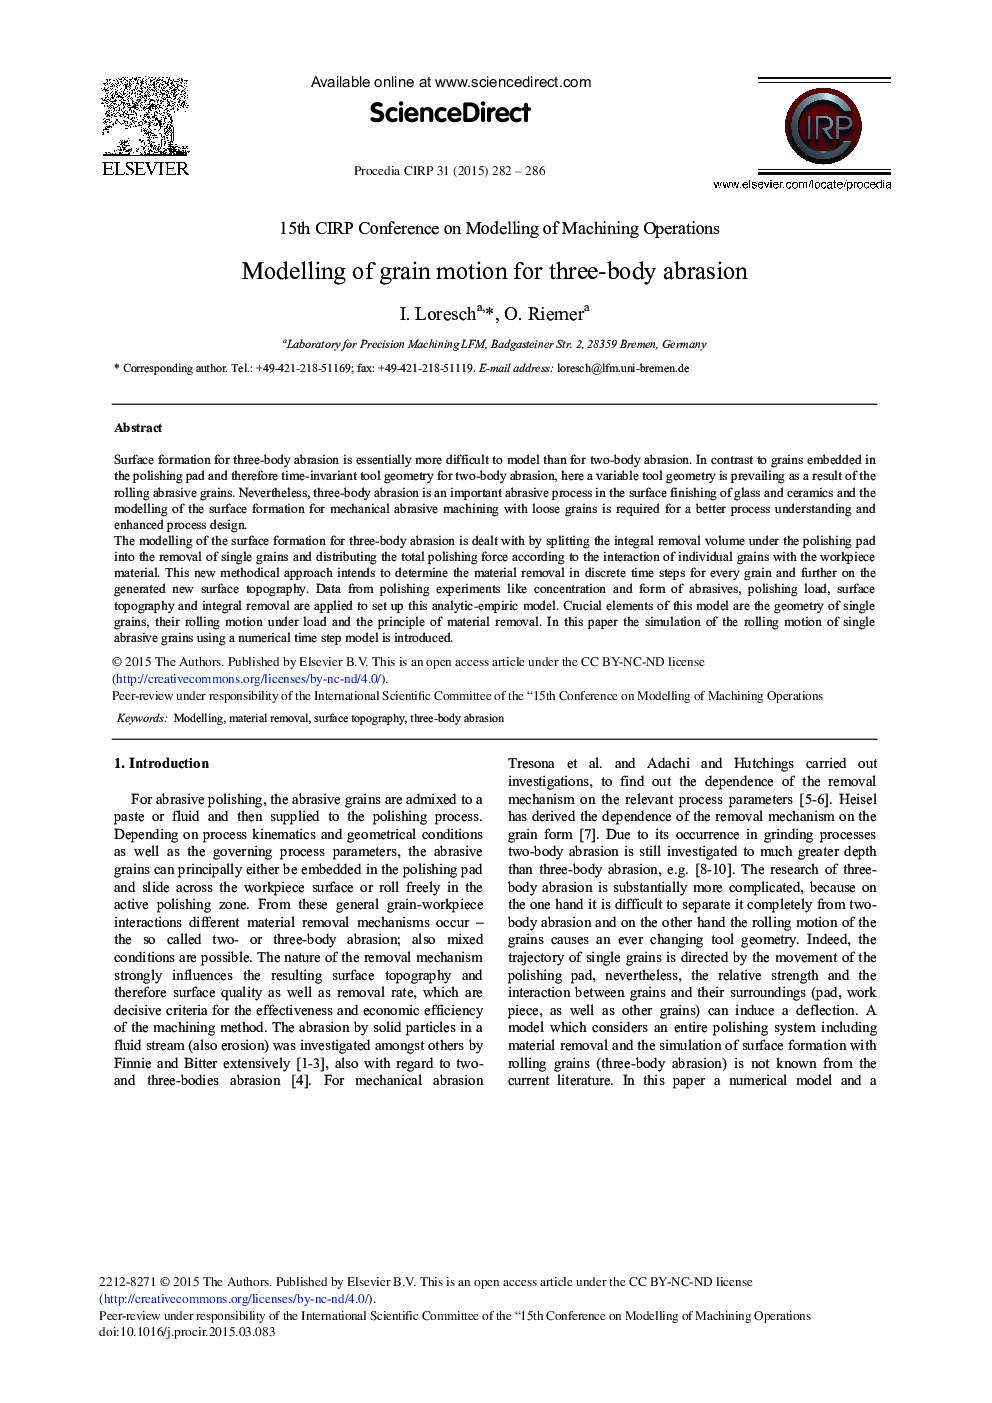 Modelling of Grain Motion for Three-body Abrasion 